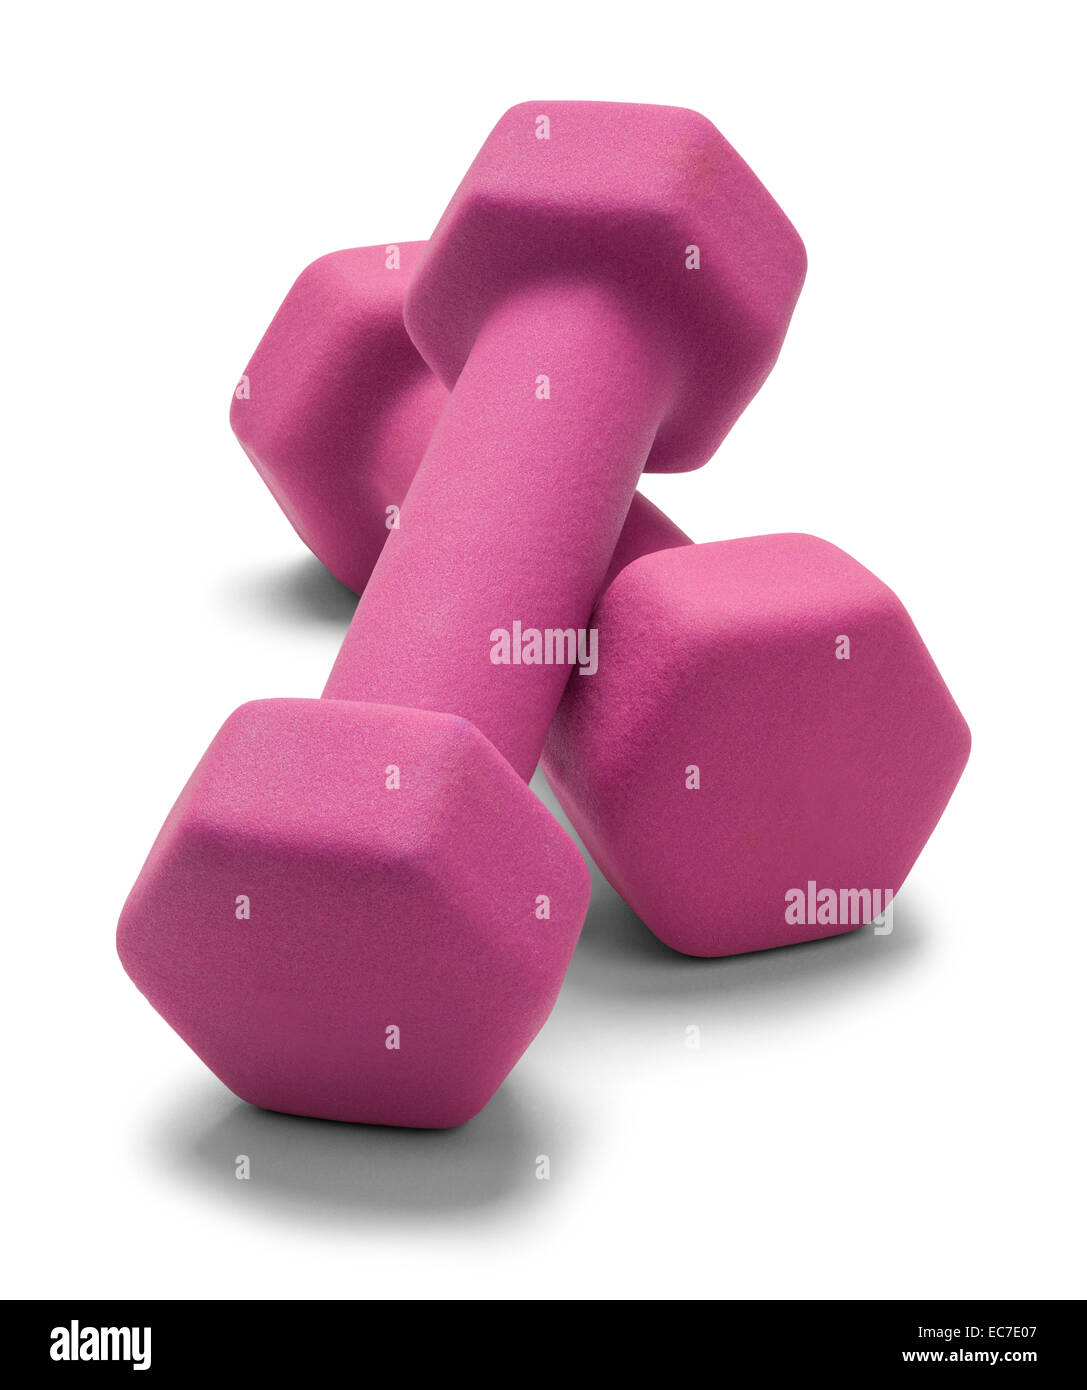 Pink Work Out Weights Isolated on White Background. Stock Photo